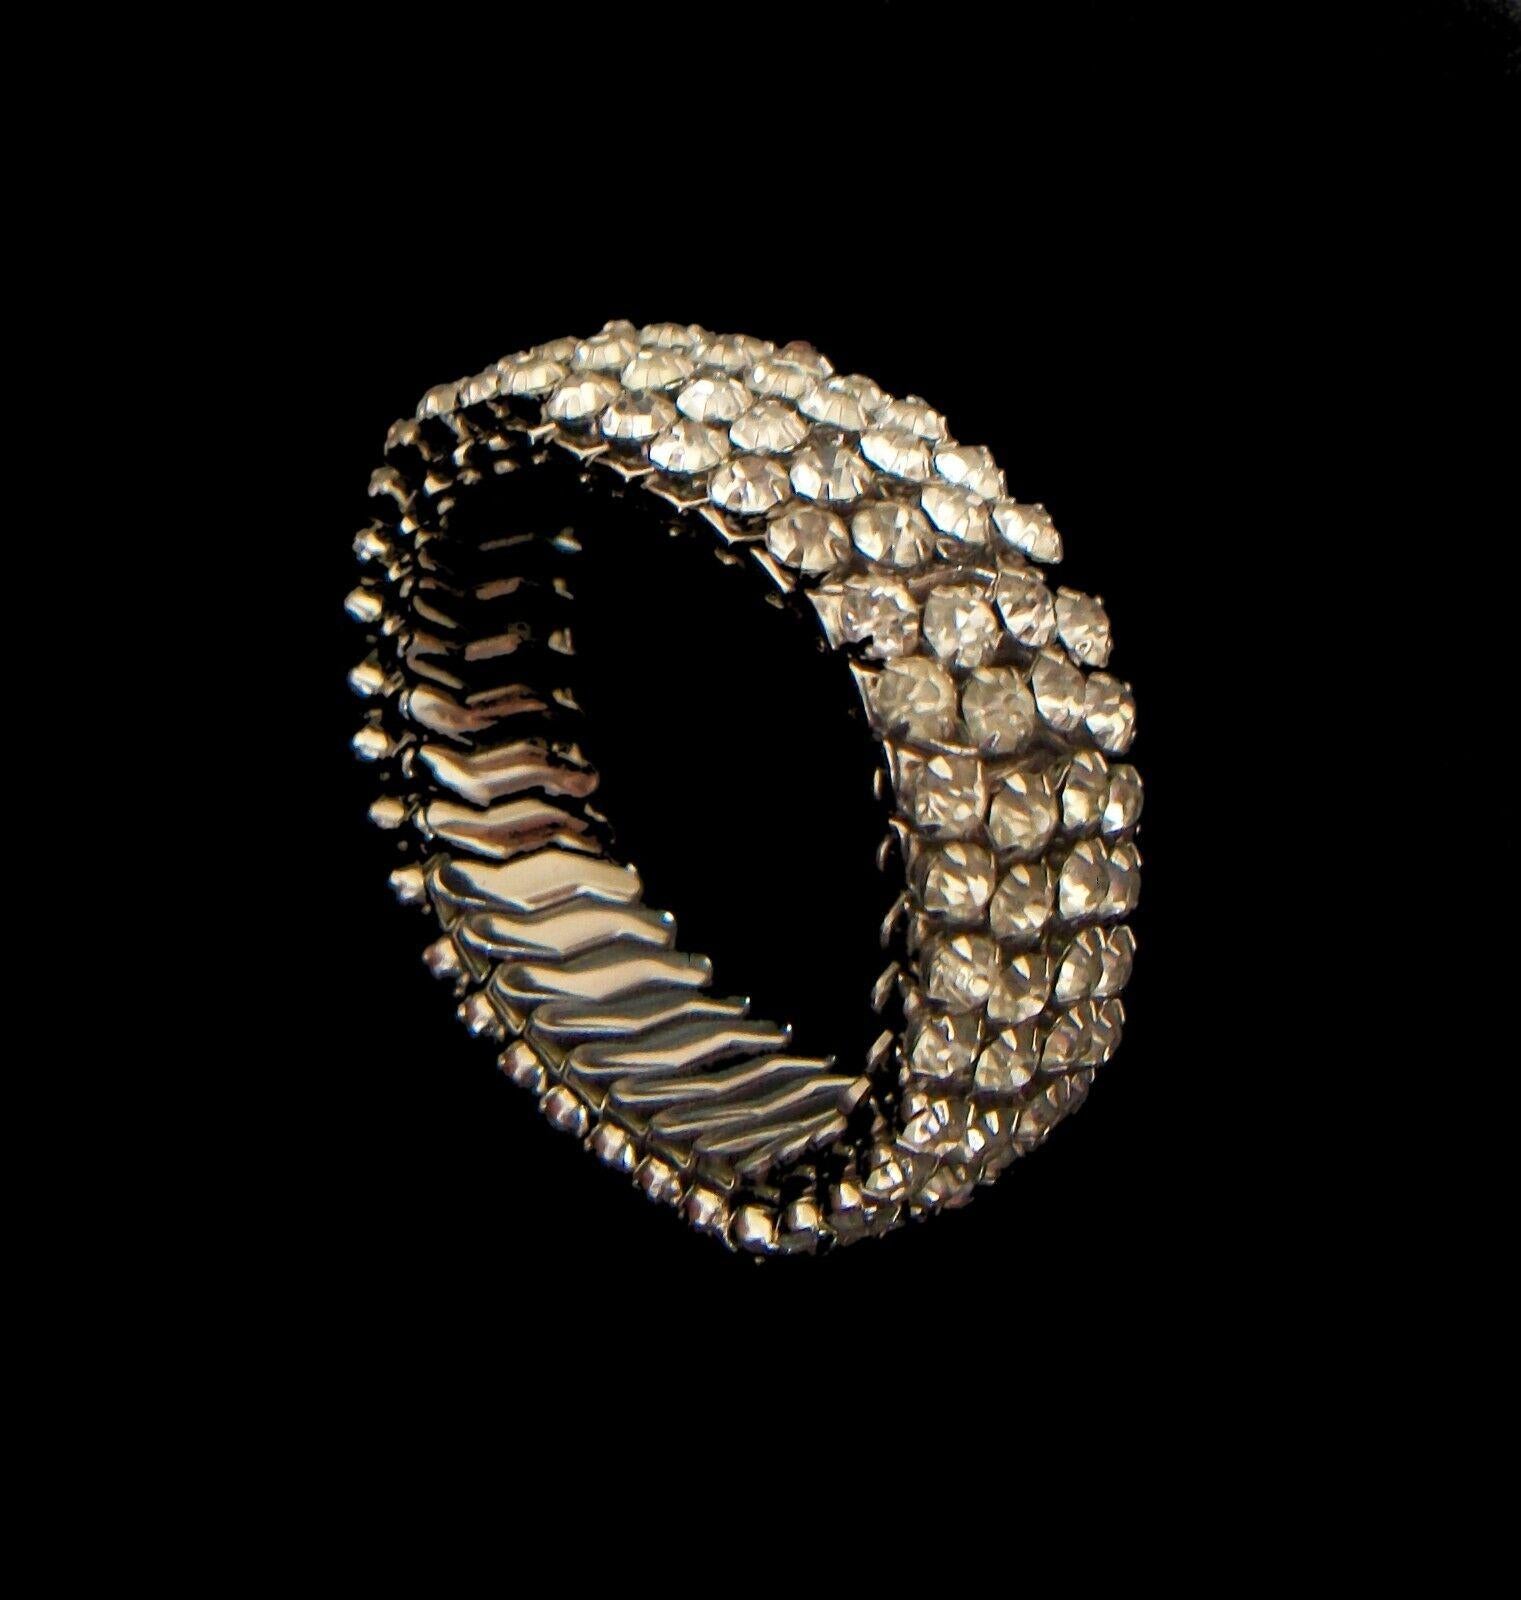 Vintage Rhinestone Flex Bracelet - Unsigned - Mid 20th Century In Good Condition For Sale In Chatham, CA